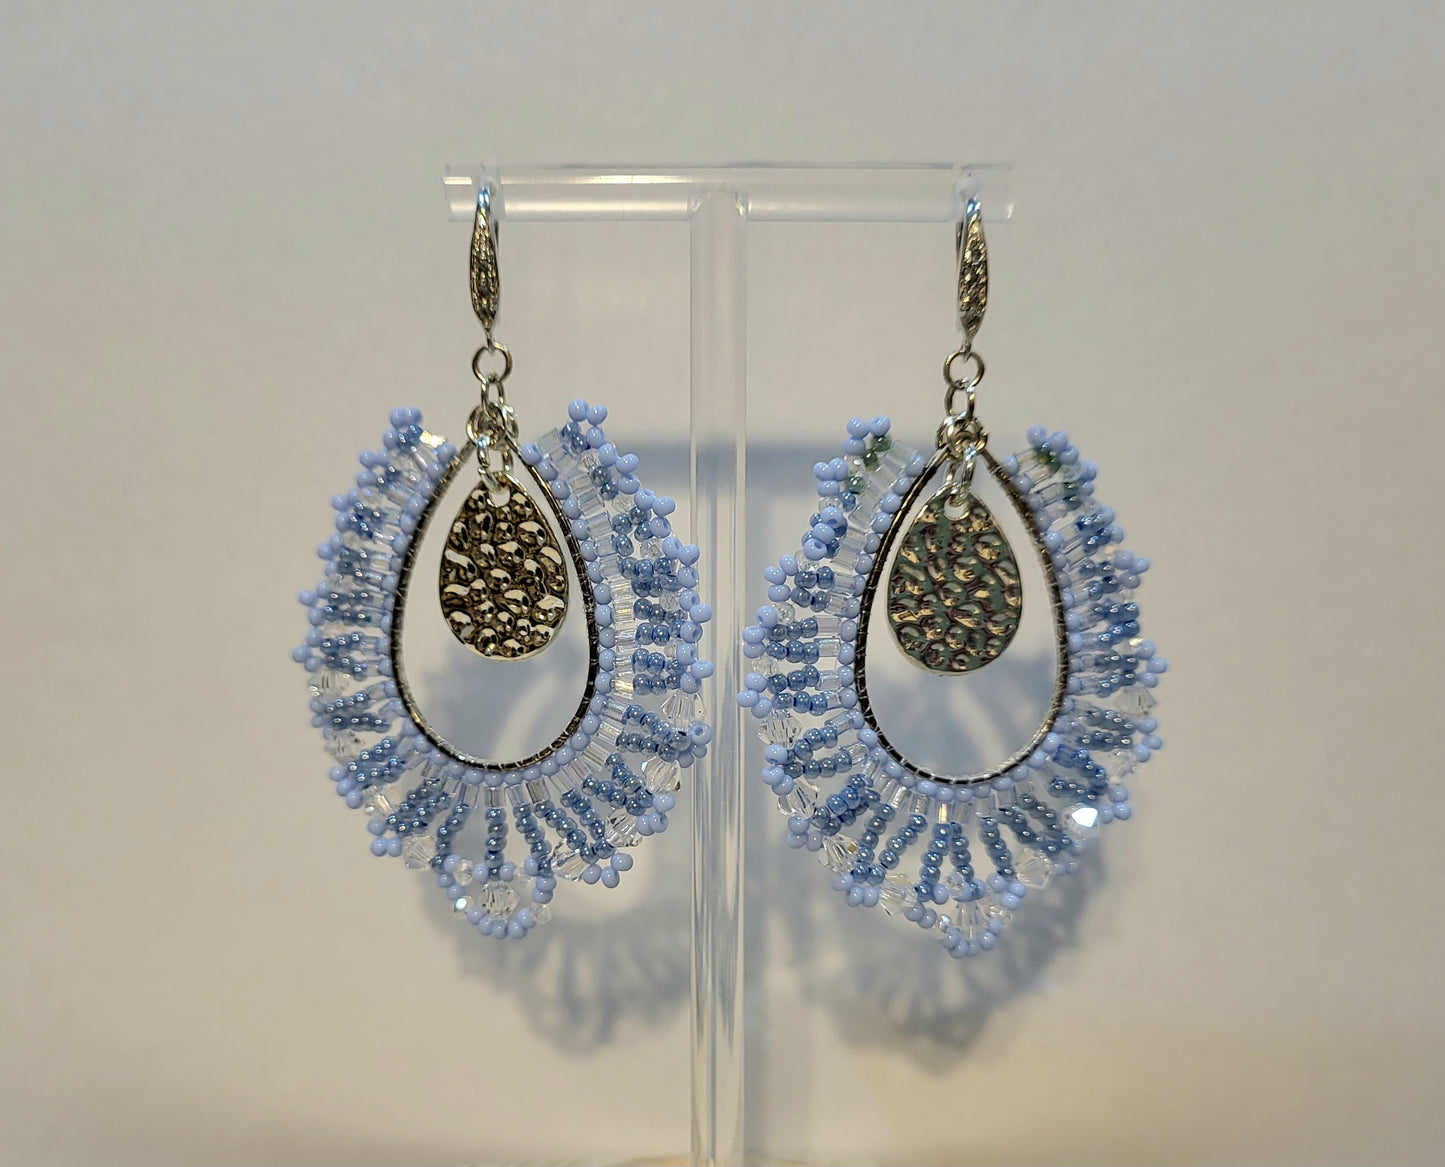 Hammered & Stitched Seed Bead Earrings